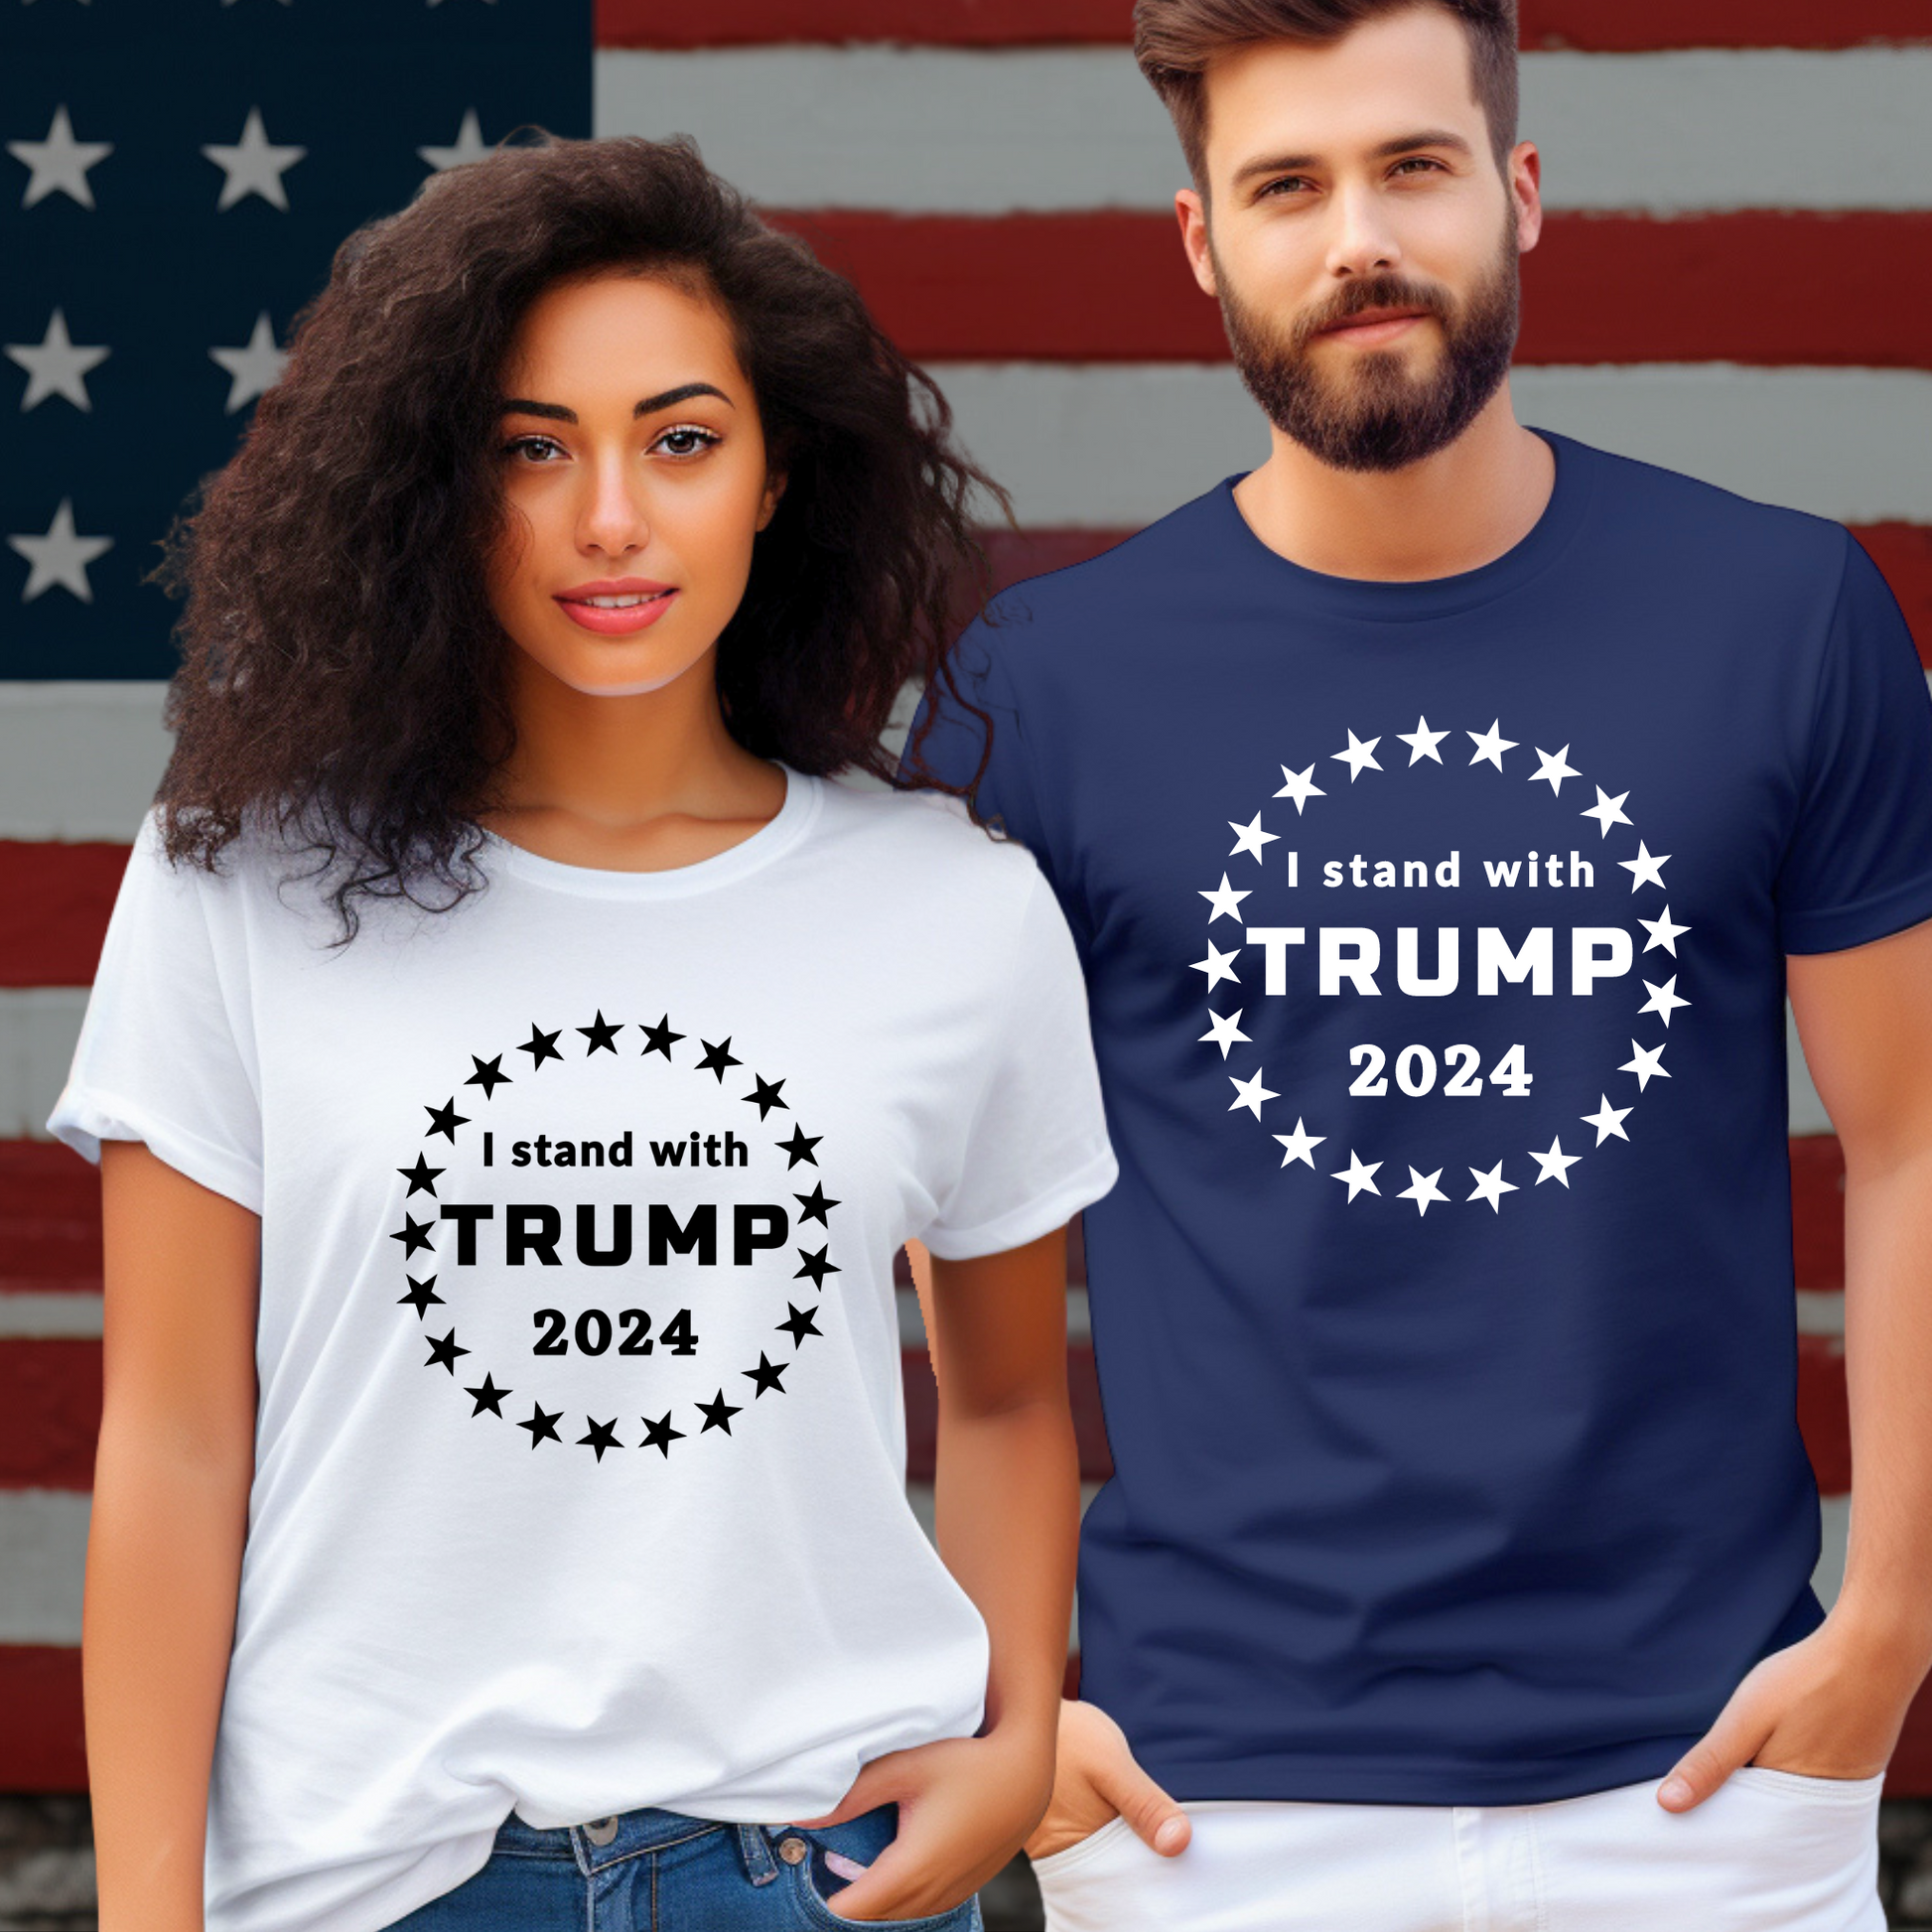 I STAND WITH TRUMP T-SHIRT - The Right Side Prints